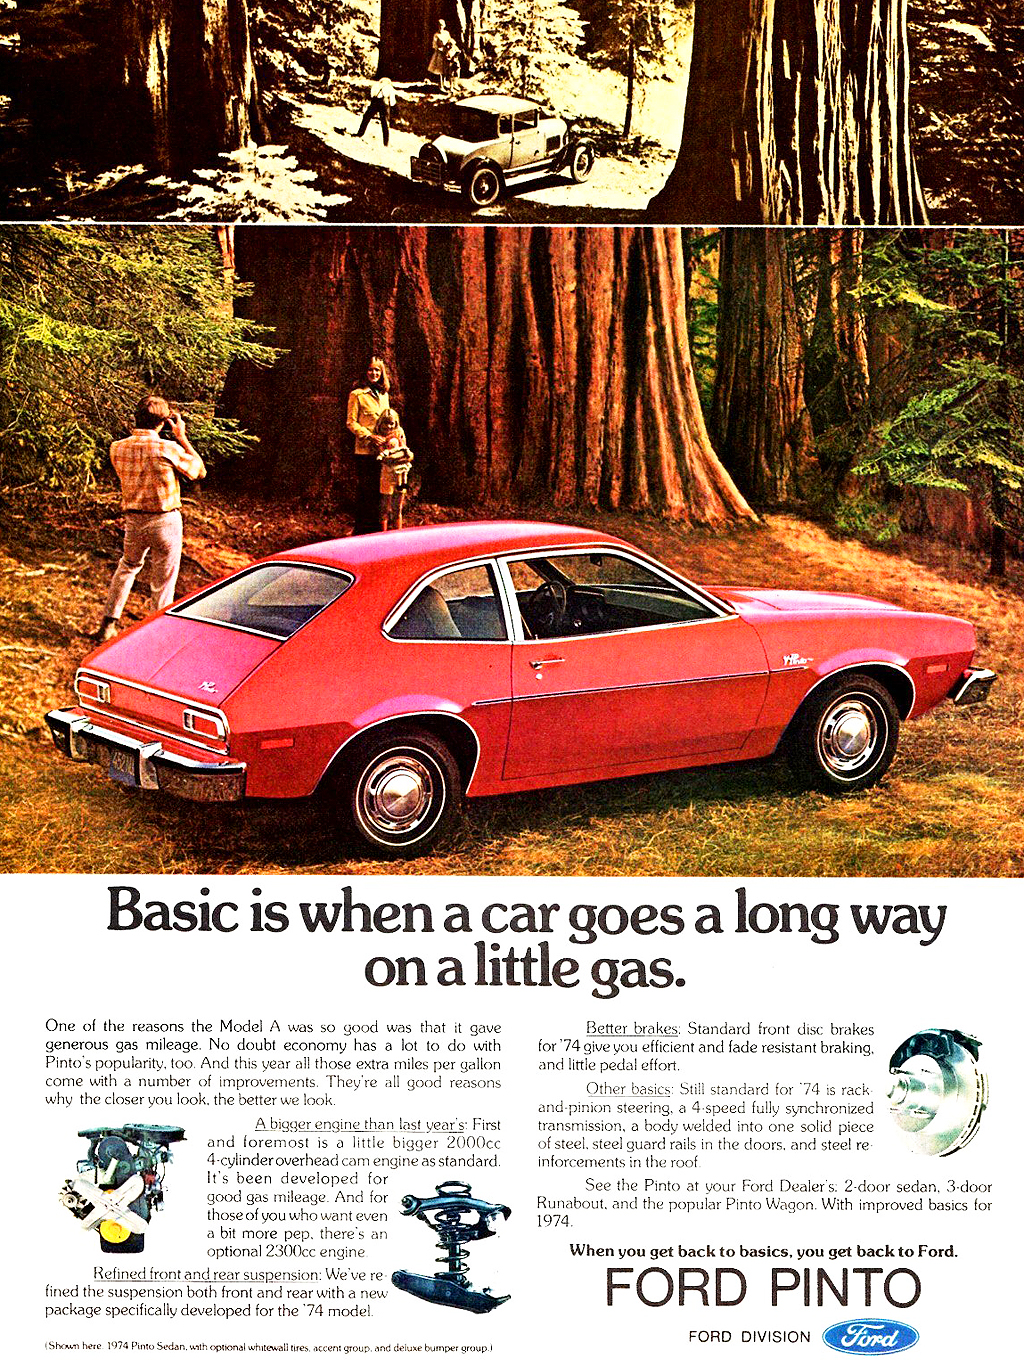 Ford pinto commercials